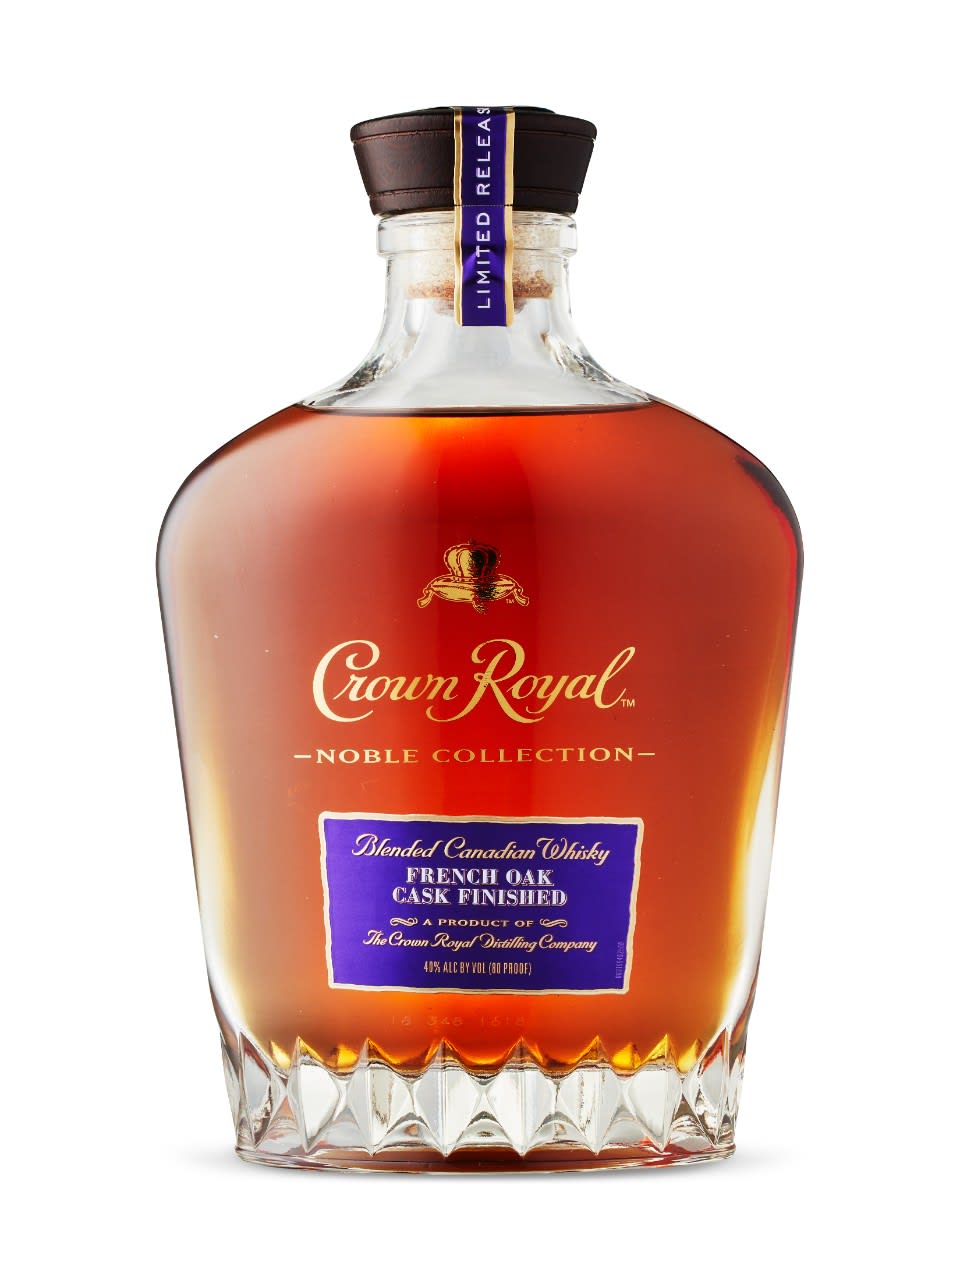 Crown Royal Noble Collection French Oak Cask Finished Whisky 750ml